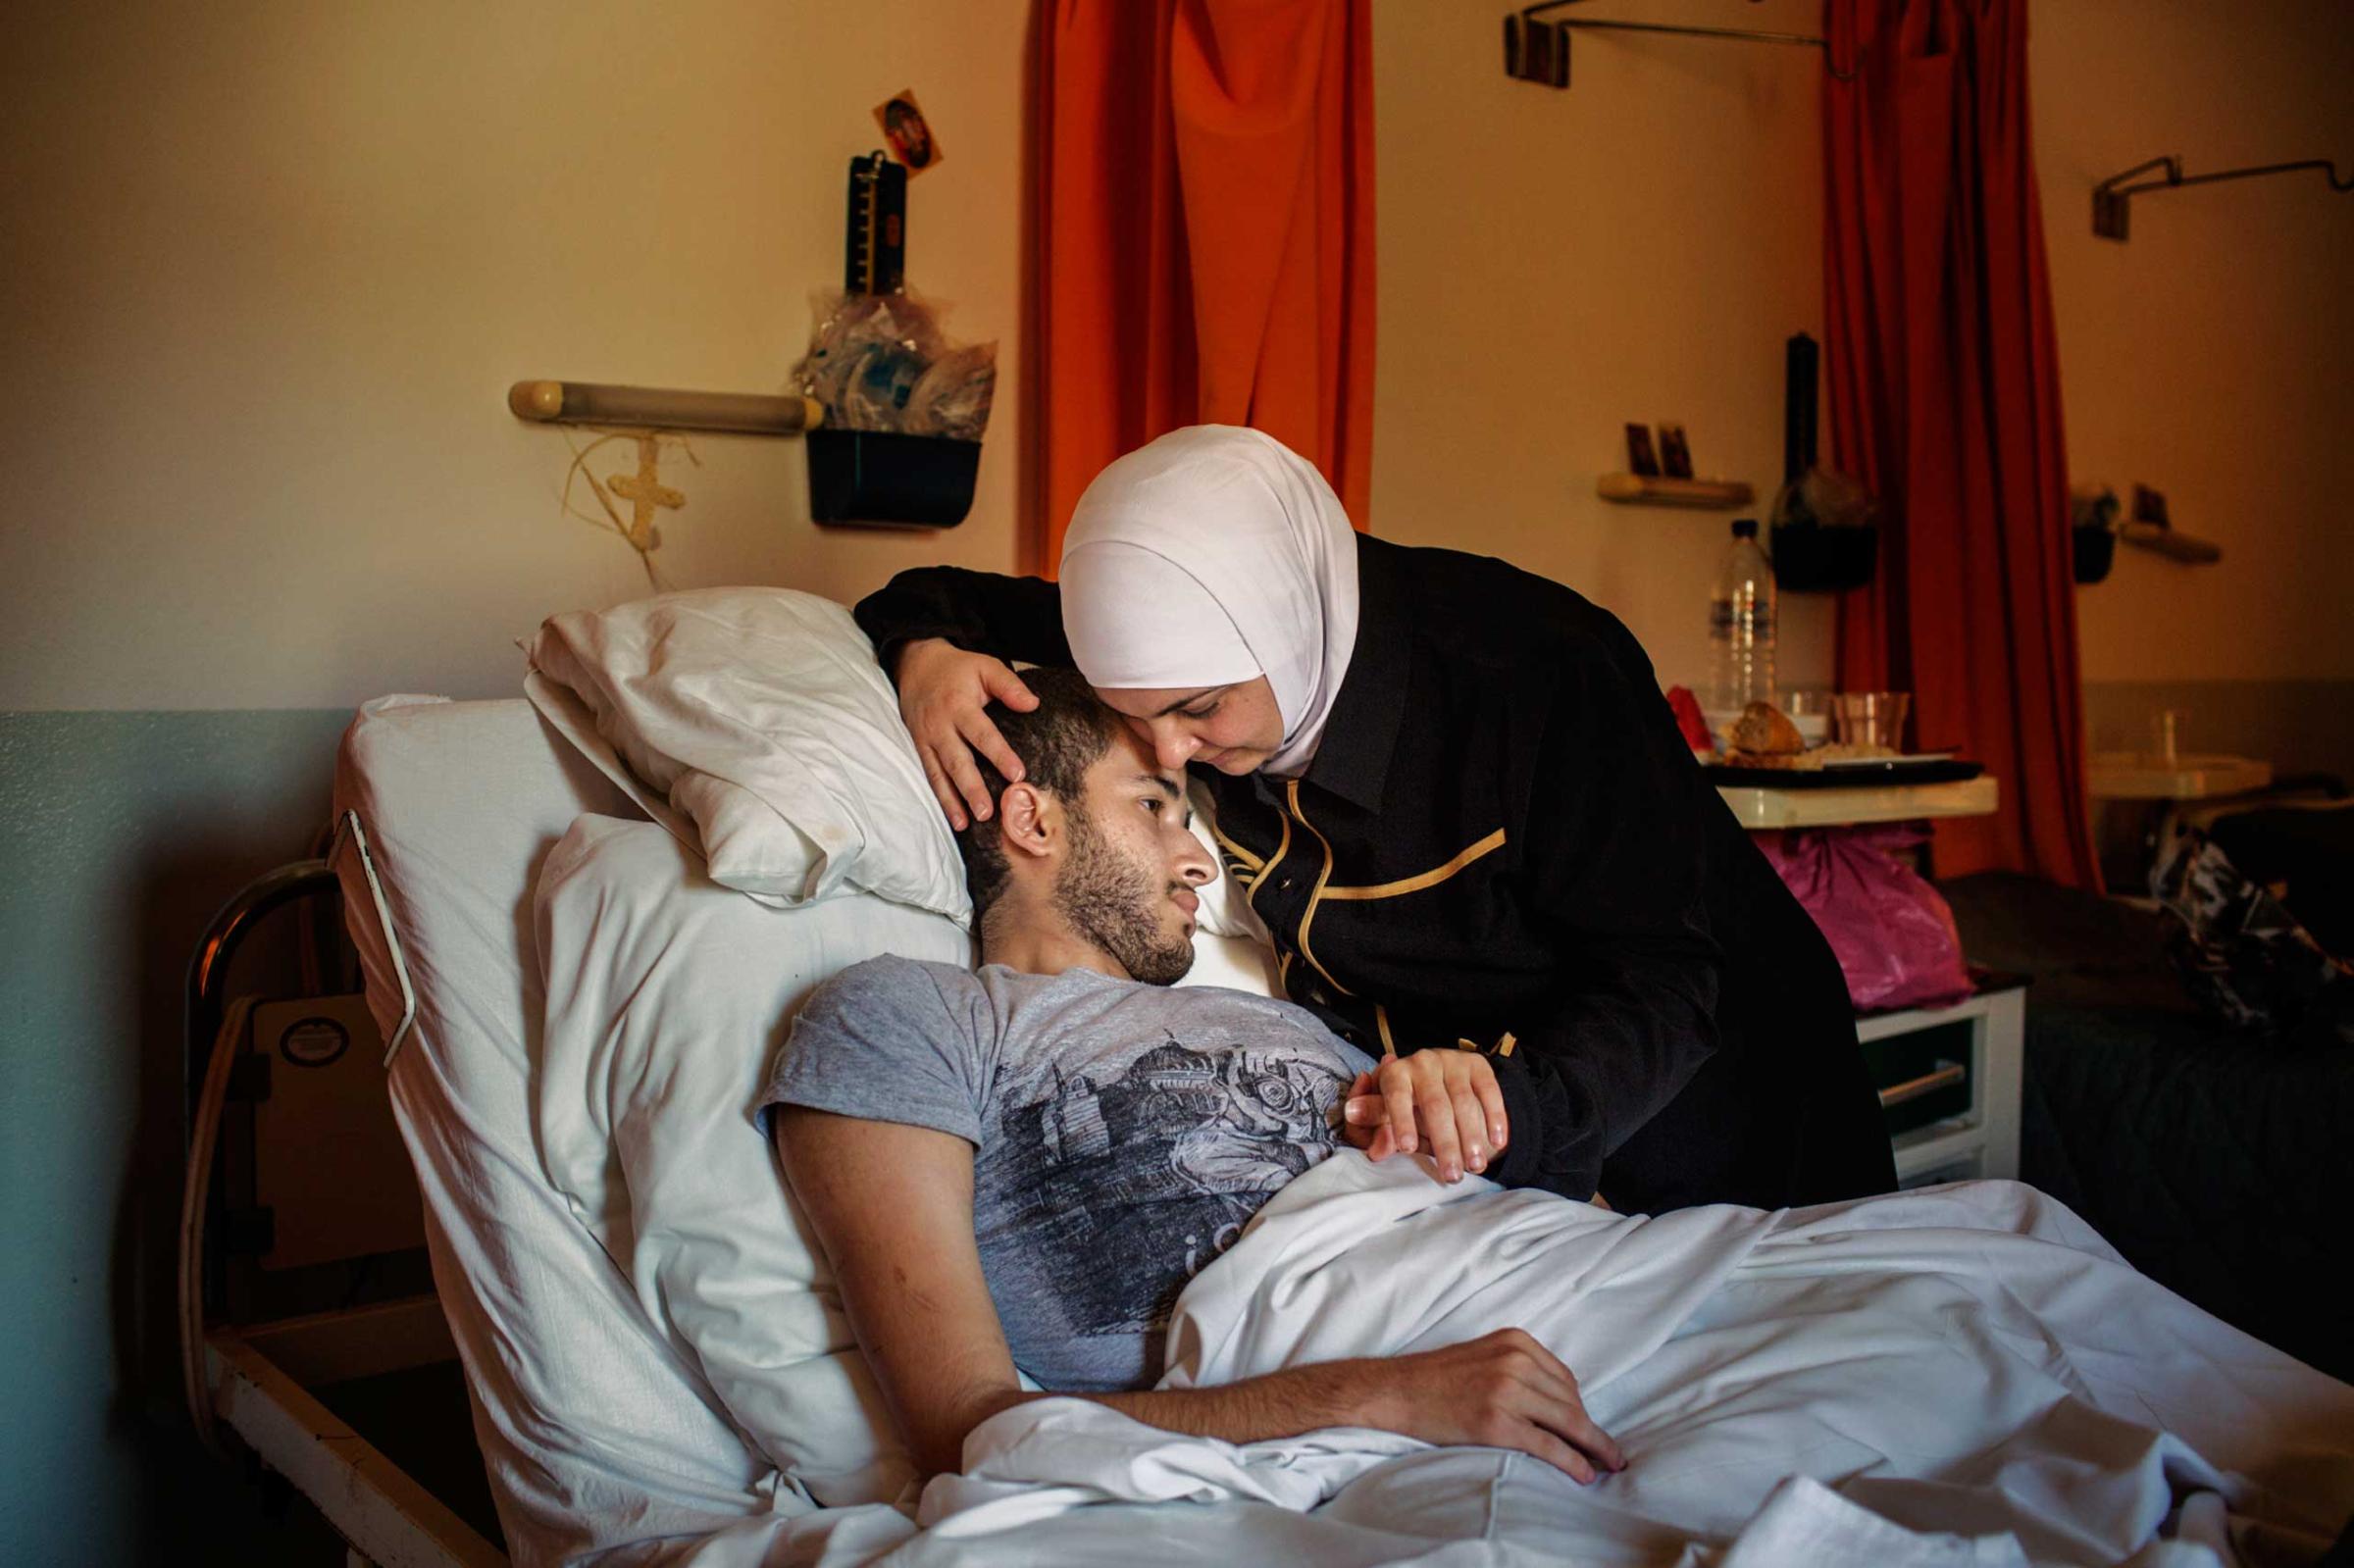 Syrian refugees, 38-year-old Ama Haider tends her 22-year-old son Khalid Hamed, who is handicapped. The family, including Haide's husband and two other children, made the arduous and risky journey from Turkey to Kos, Greece, by paying smugglers 10,000 euro, July 8, 2015.